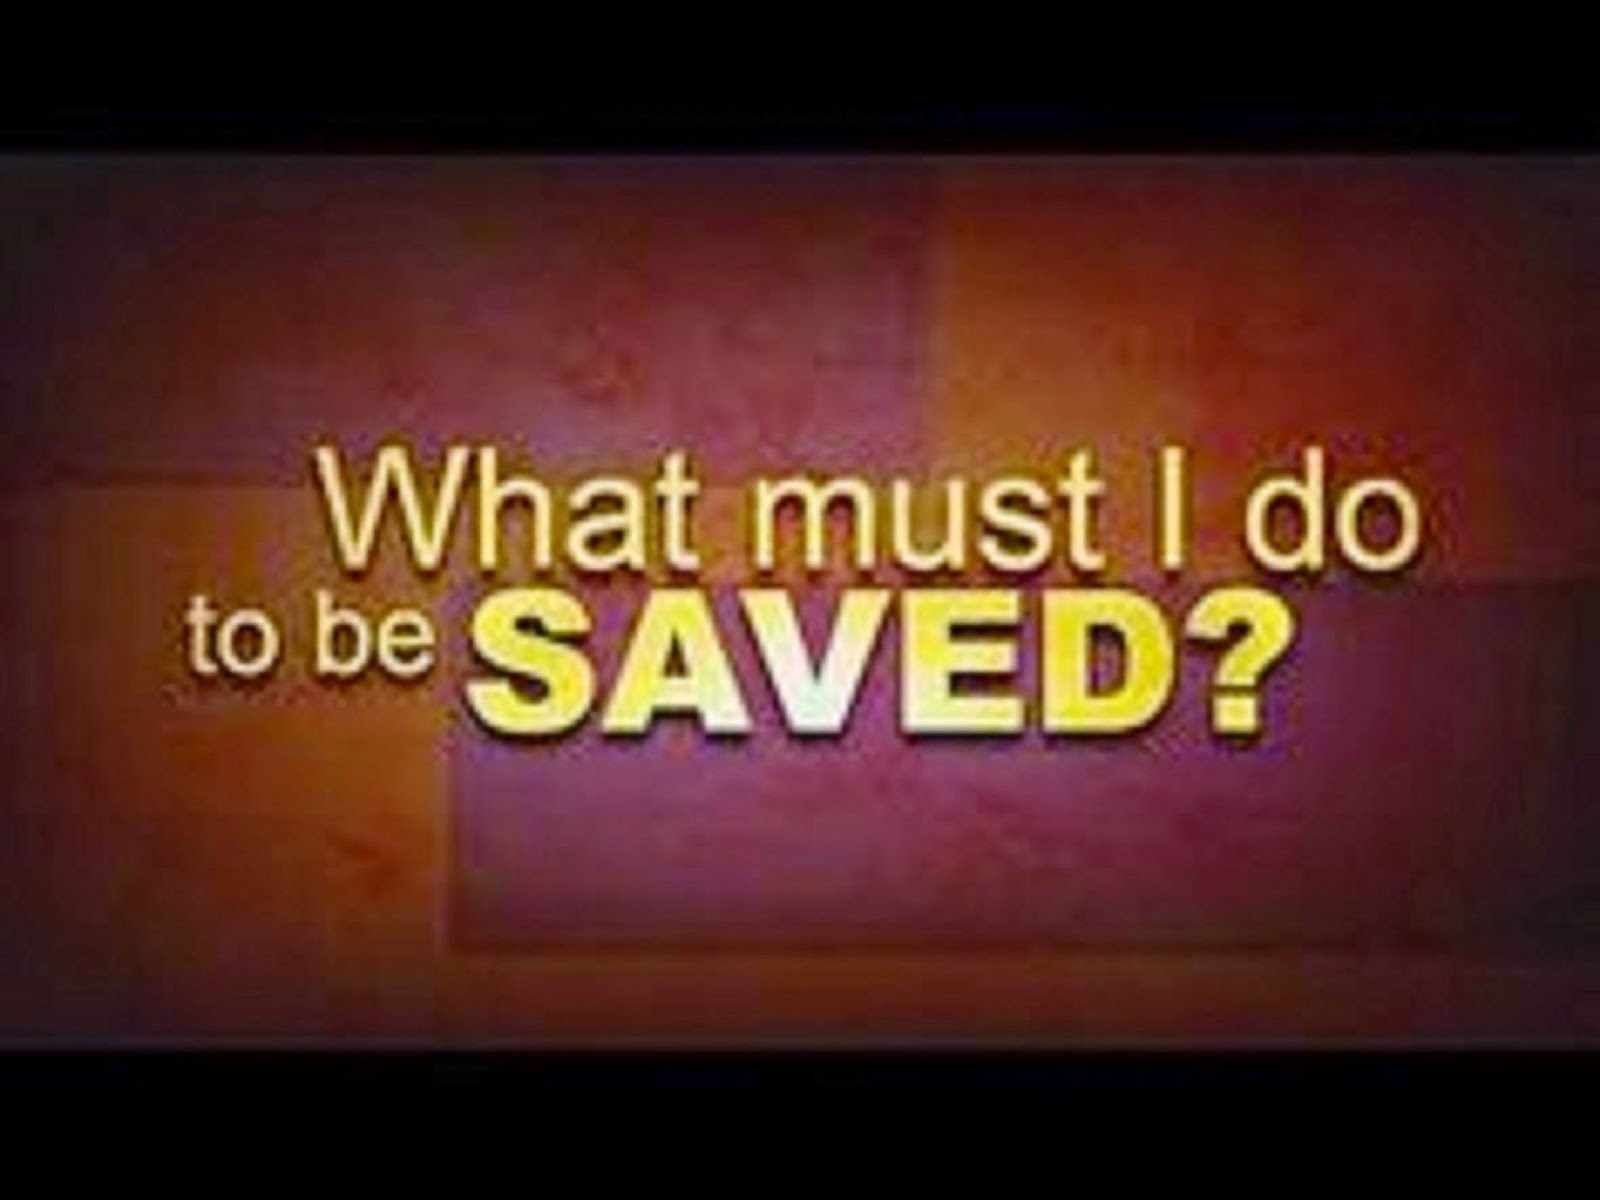 WHAT MUST I DO TO BE SAVED?